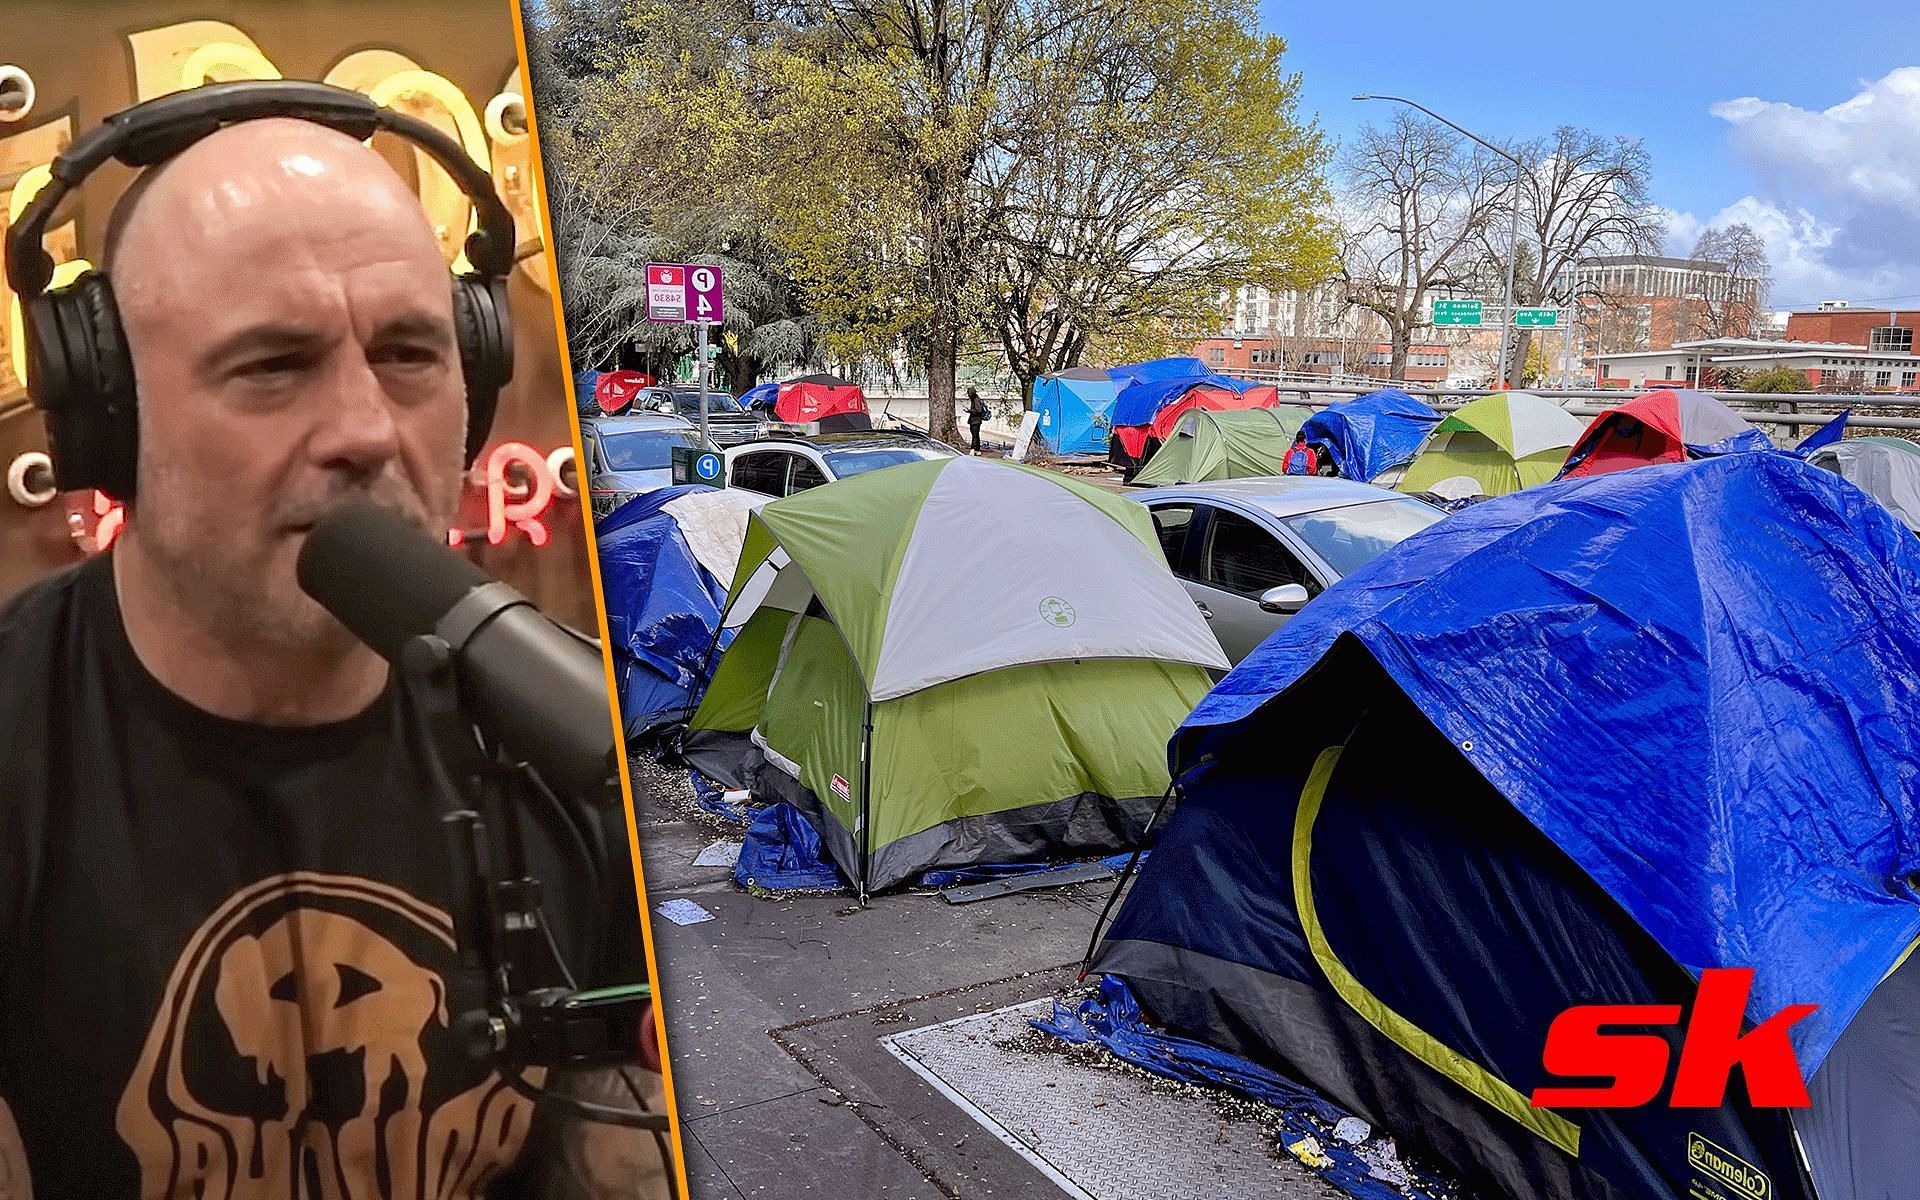 Joe Rogan (left)[Image courtesy: @powerfuljre on YouTube] and Homeless crisis in Portland (right)[Image courtesy: www.opb.org] 